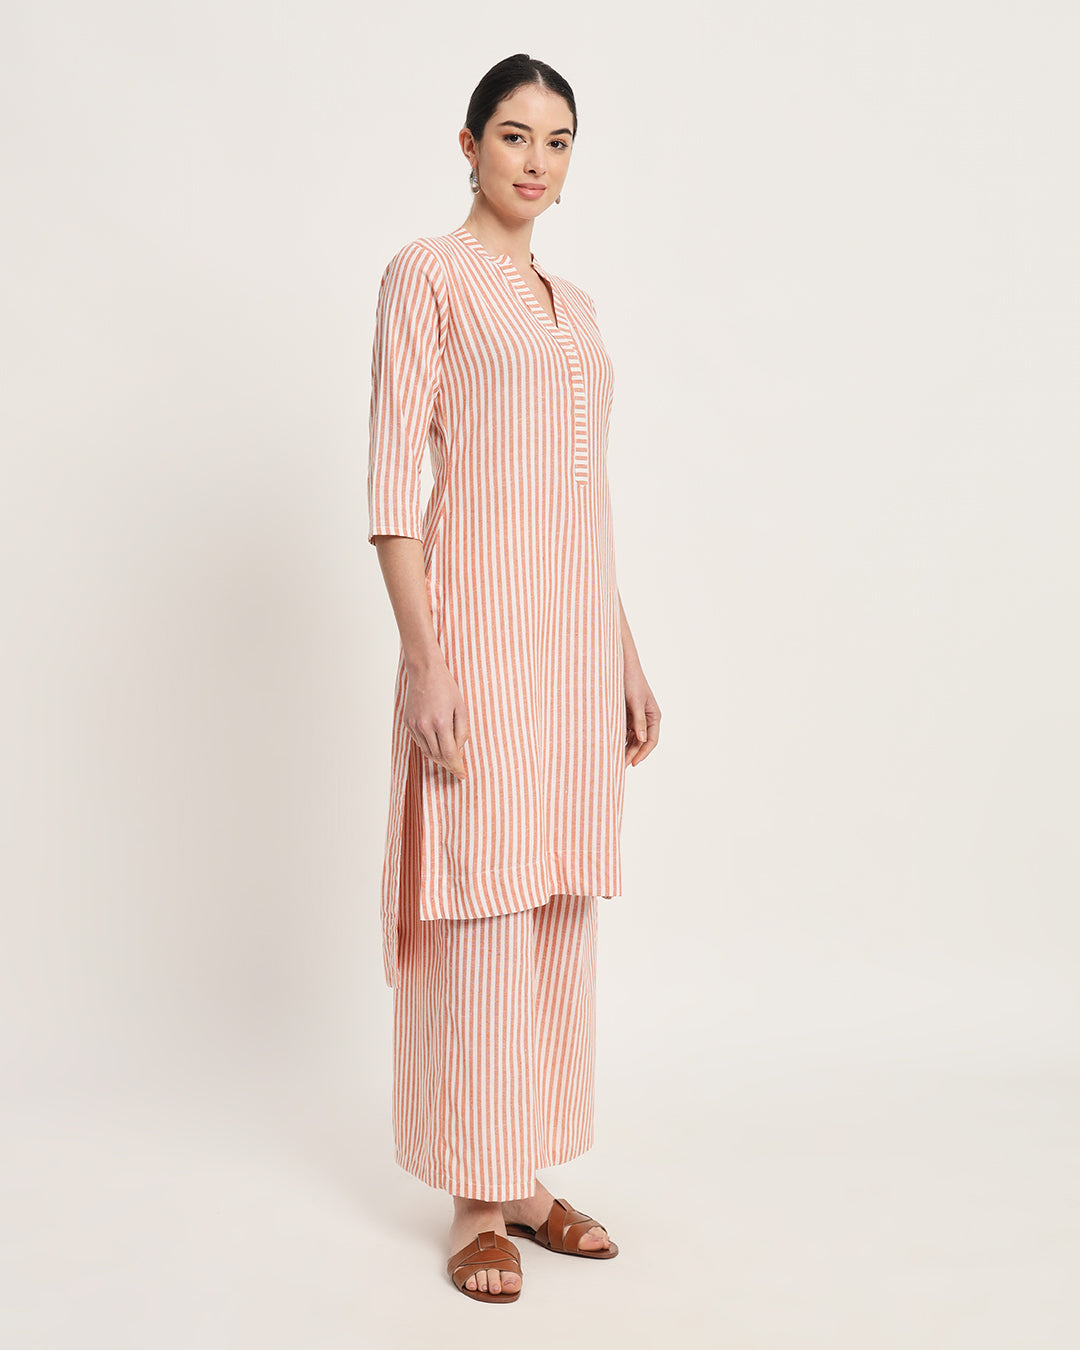 Rustic Charm Stripes High-Low Co-ord Set